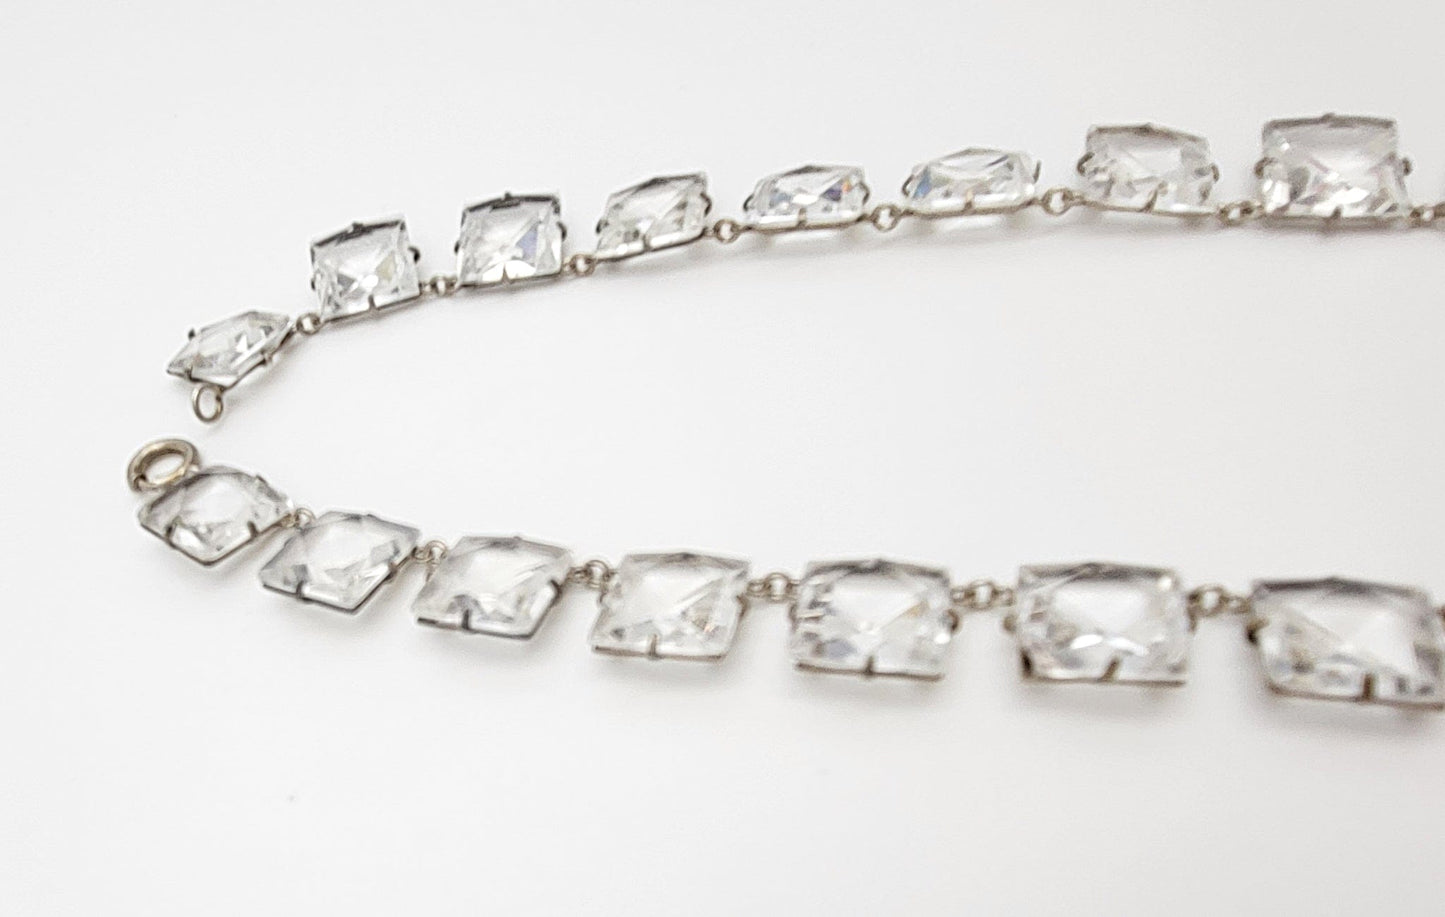 Jules Goldstein Jewelry Superb Jules Goldstein & Co NYC Sterling & Clear Quartz Art Deco Necklace 1930s